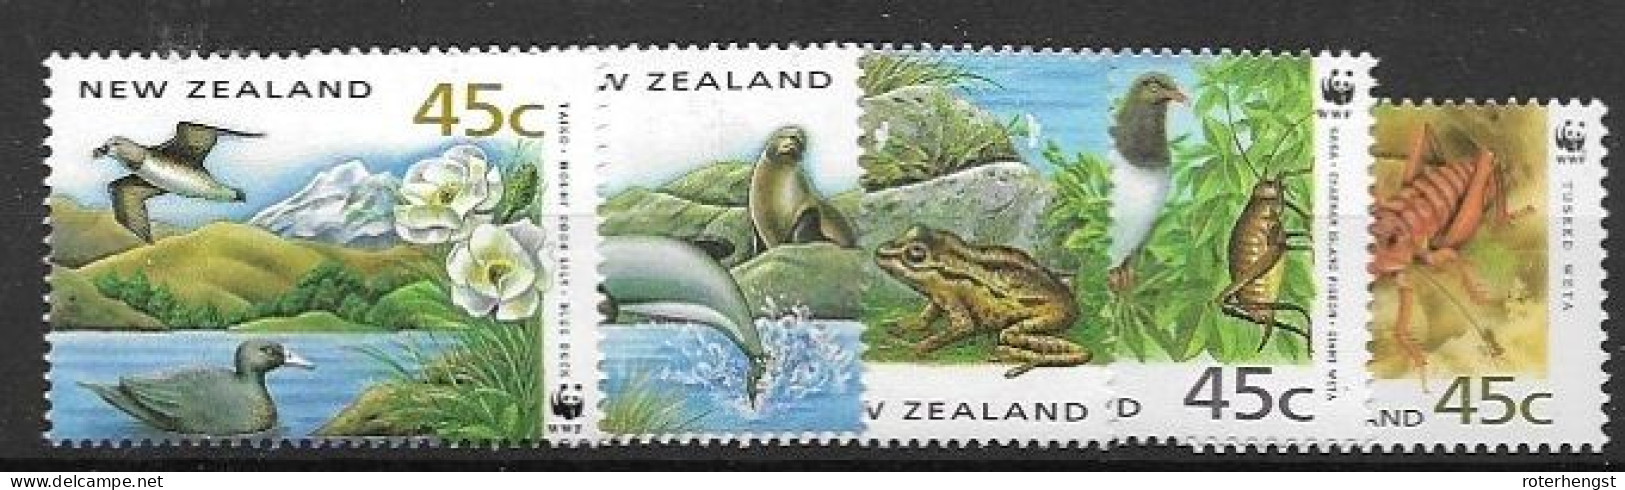 New Zealand Mnh ** Set 1993 WWF Animals Birds Set Frog Seal Insects - Unused Stamps